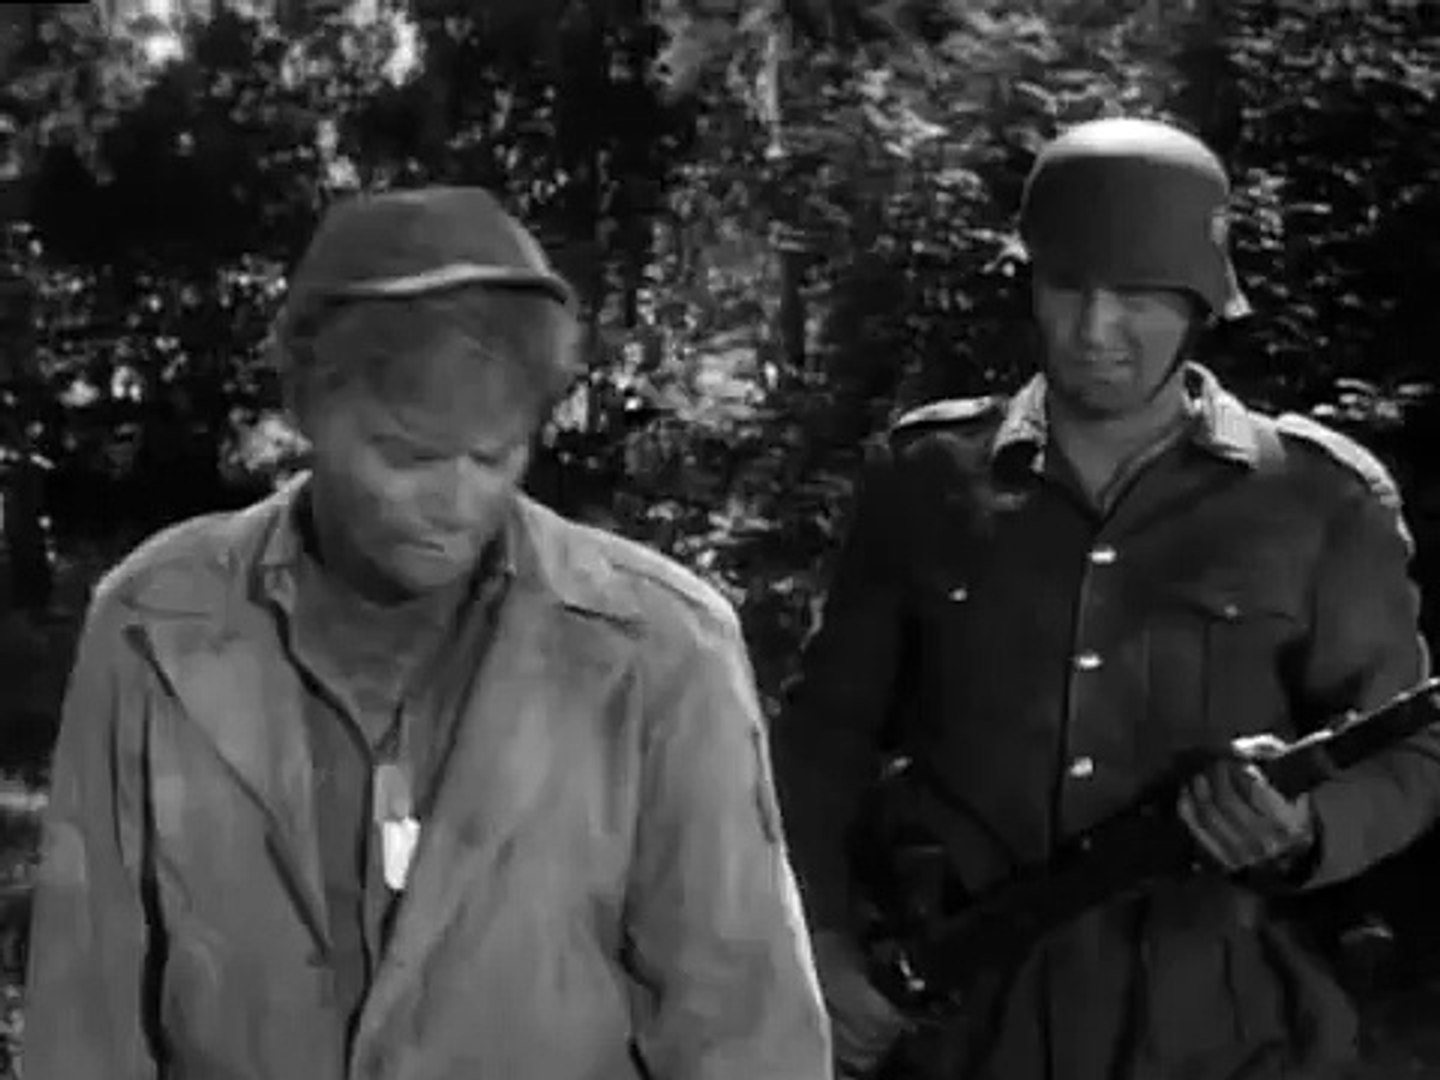 COMBAT! s.2 ep.4: The Long Way Home Pt 1 (1963) - video Dailymotion